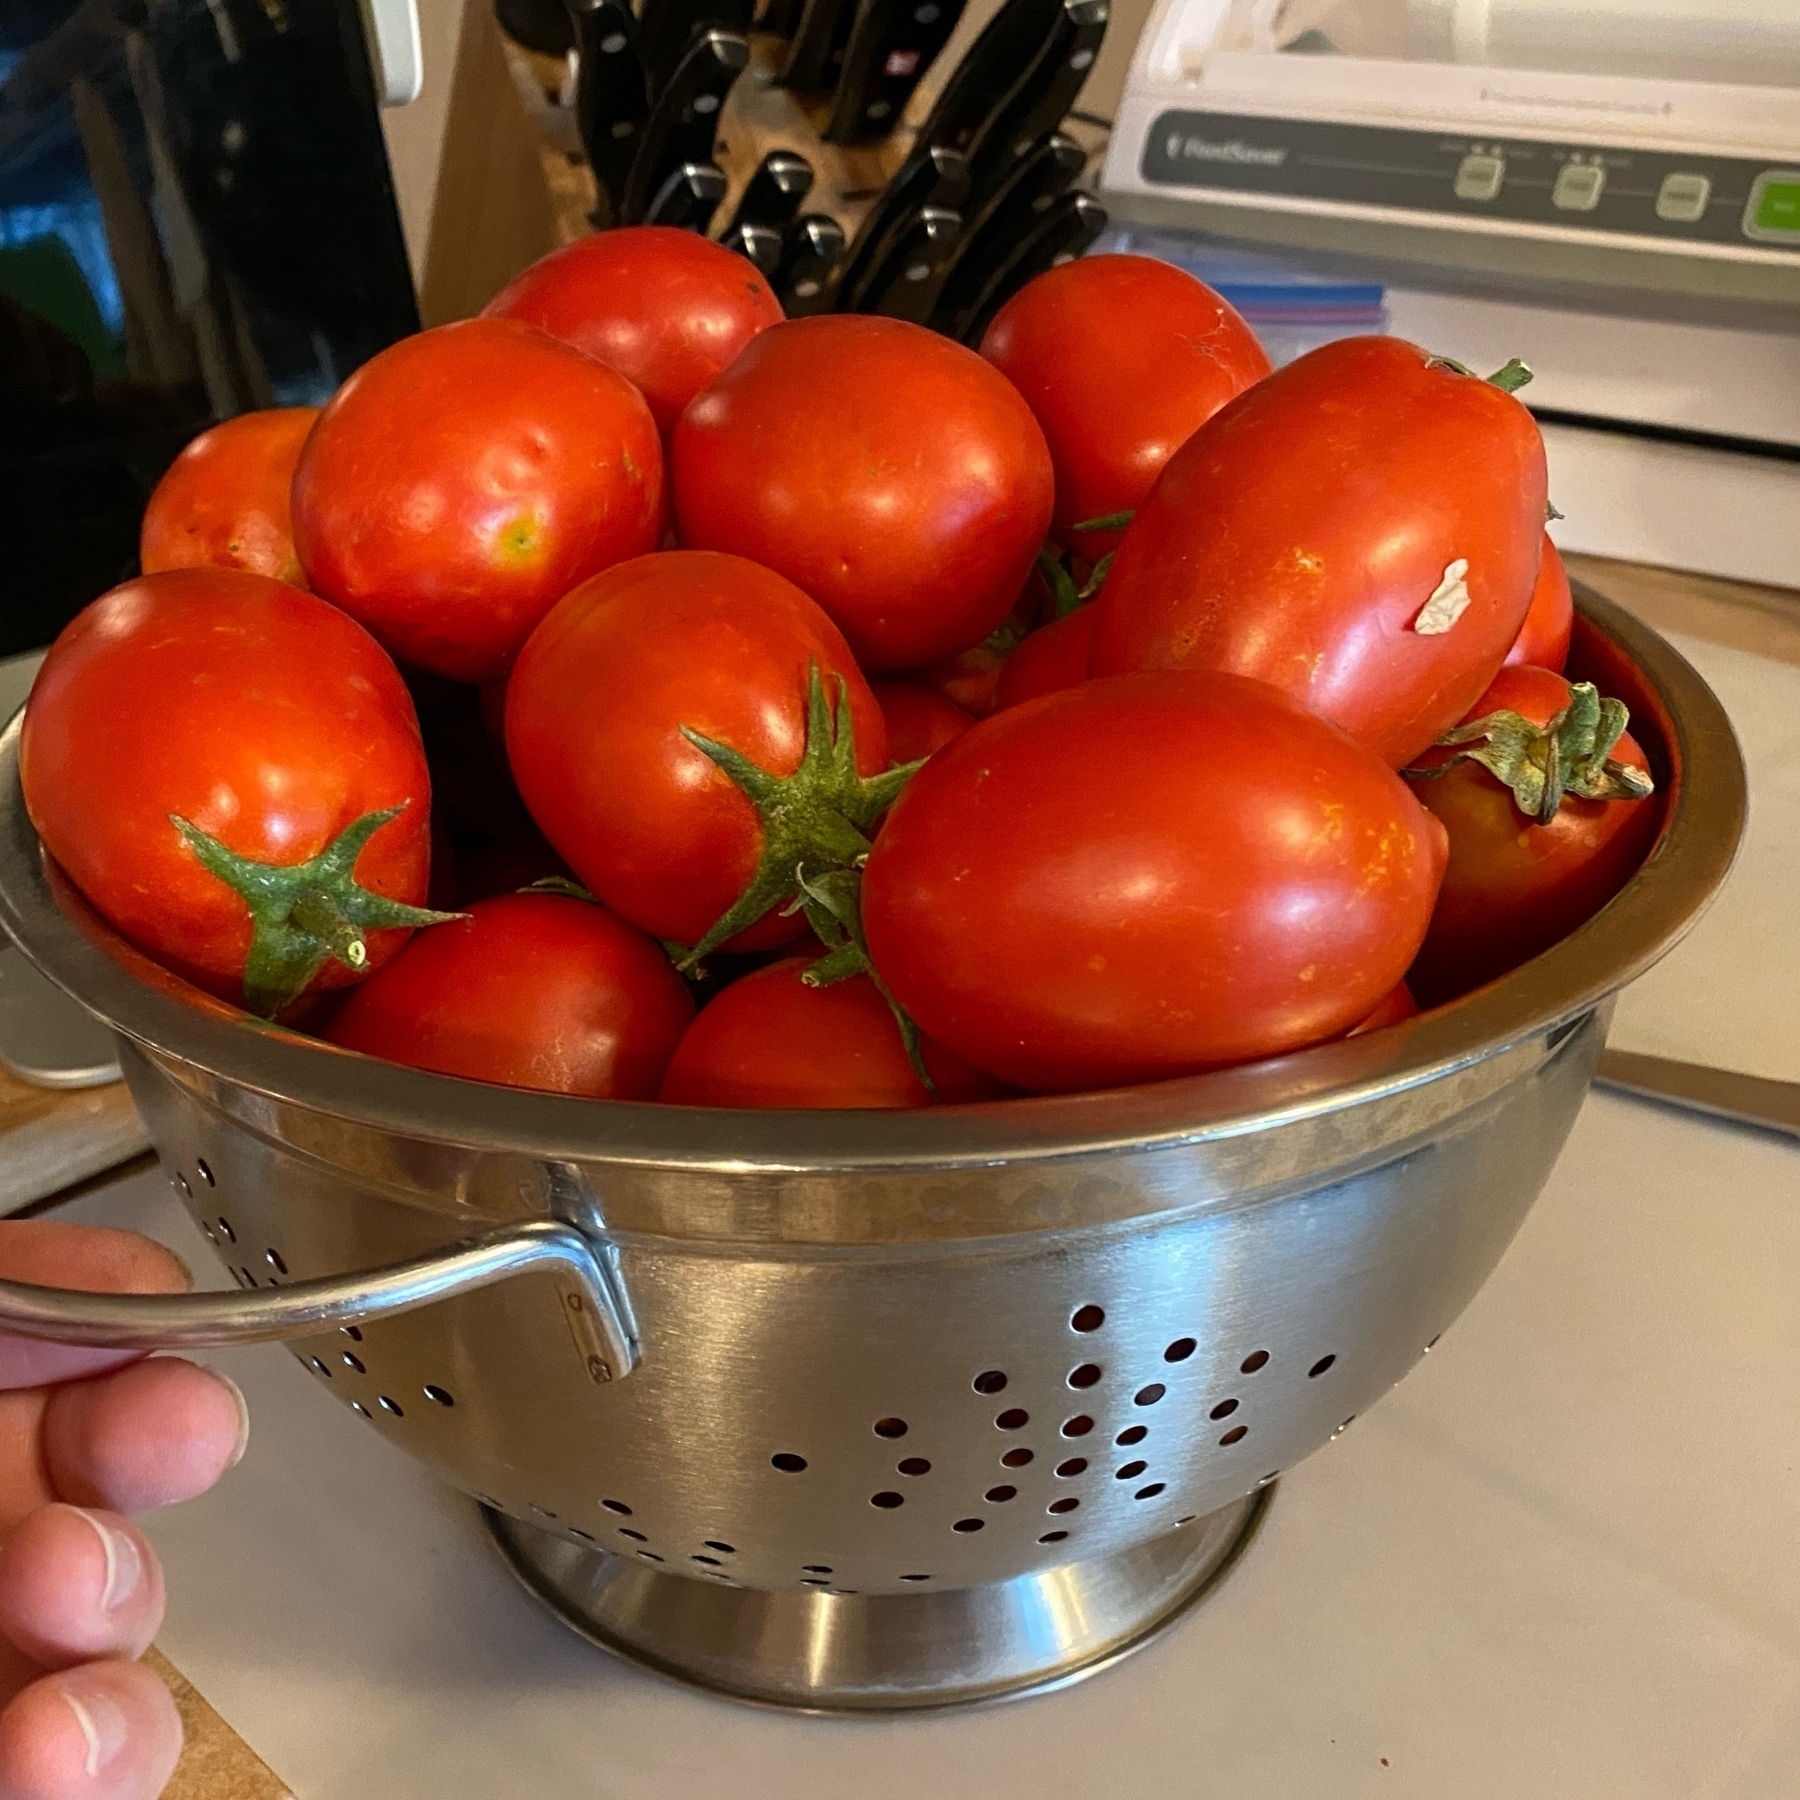 harvested ripe tomatoes, piled high in a metal colander